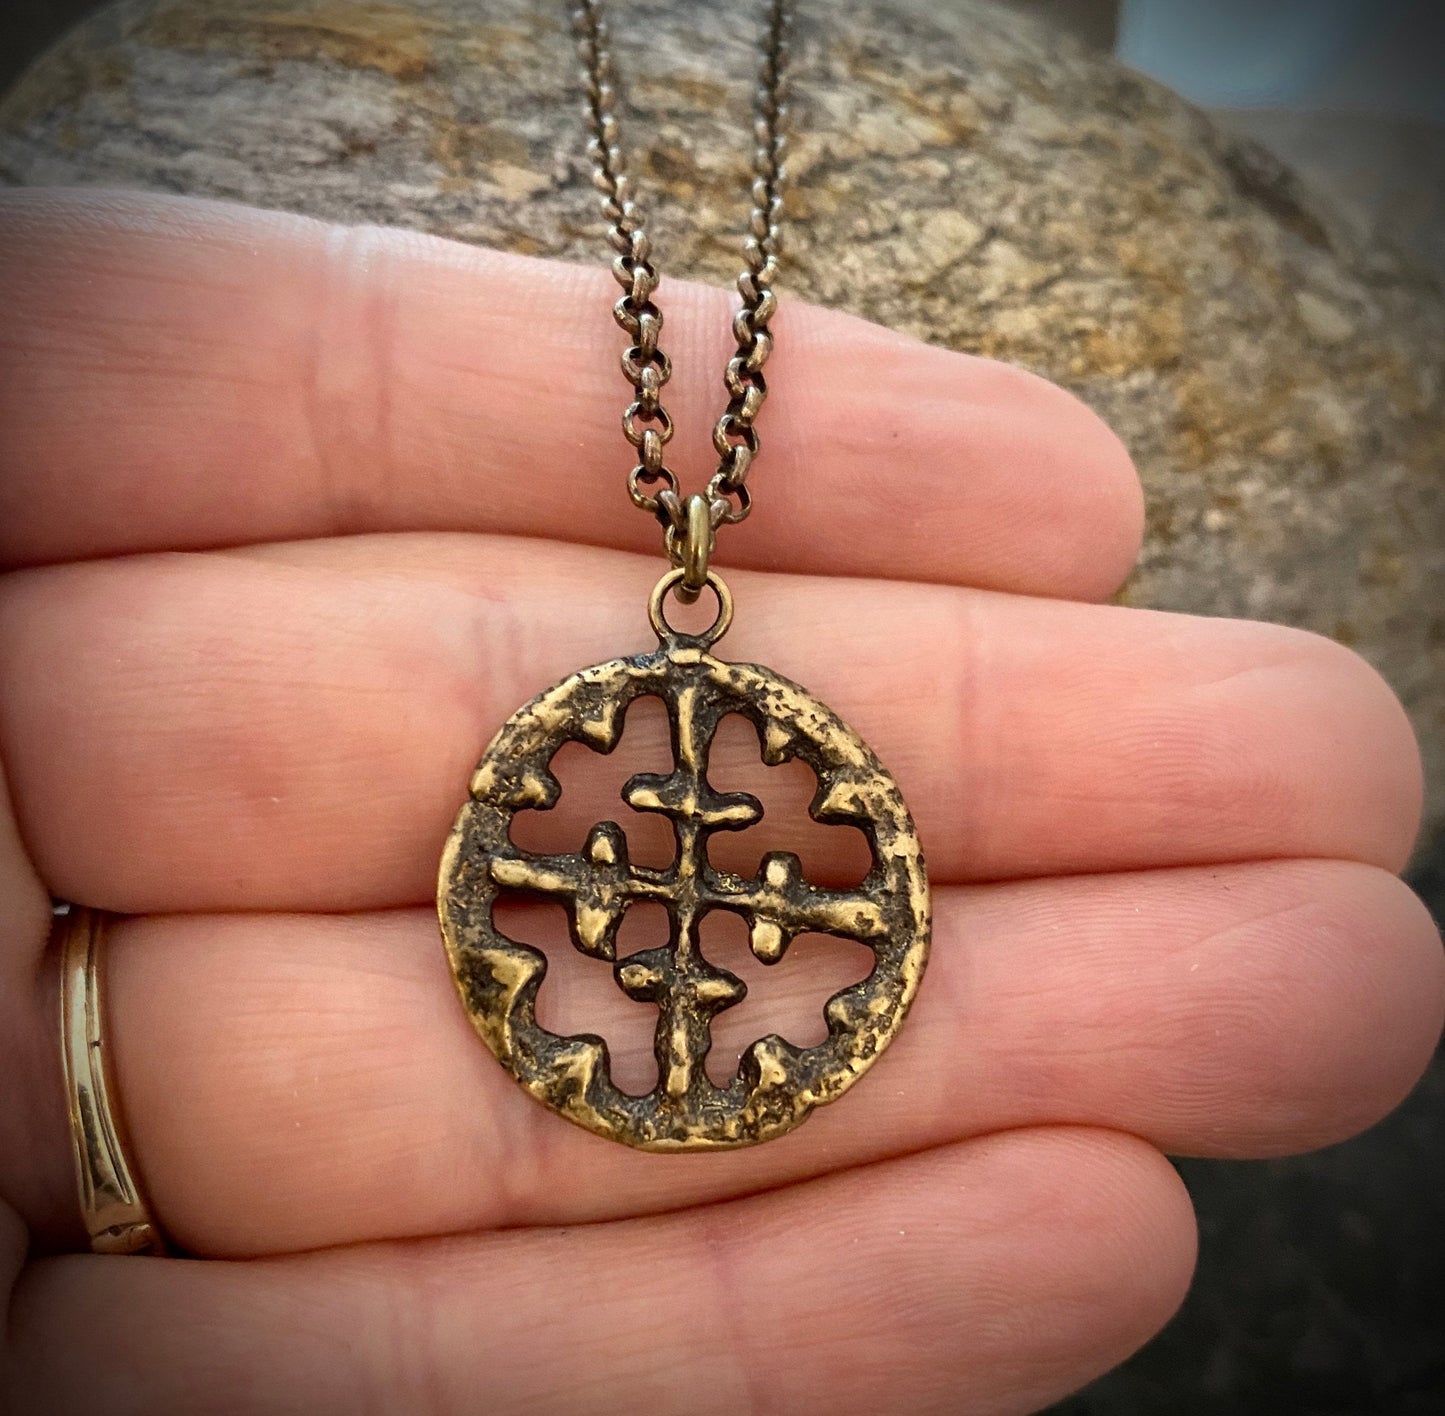 Men's Necklace, Viking Era Cross Produced from Original 10th Century Piece, Antiqued Brass Unisex Jewelry, 20 or 24 Inch Chain, BR-016